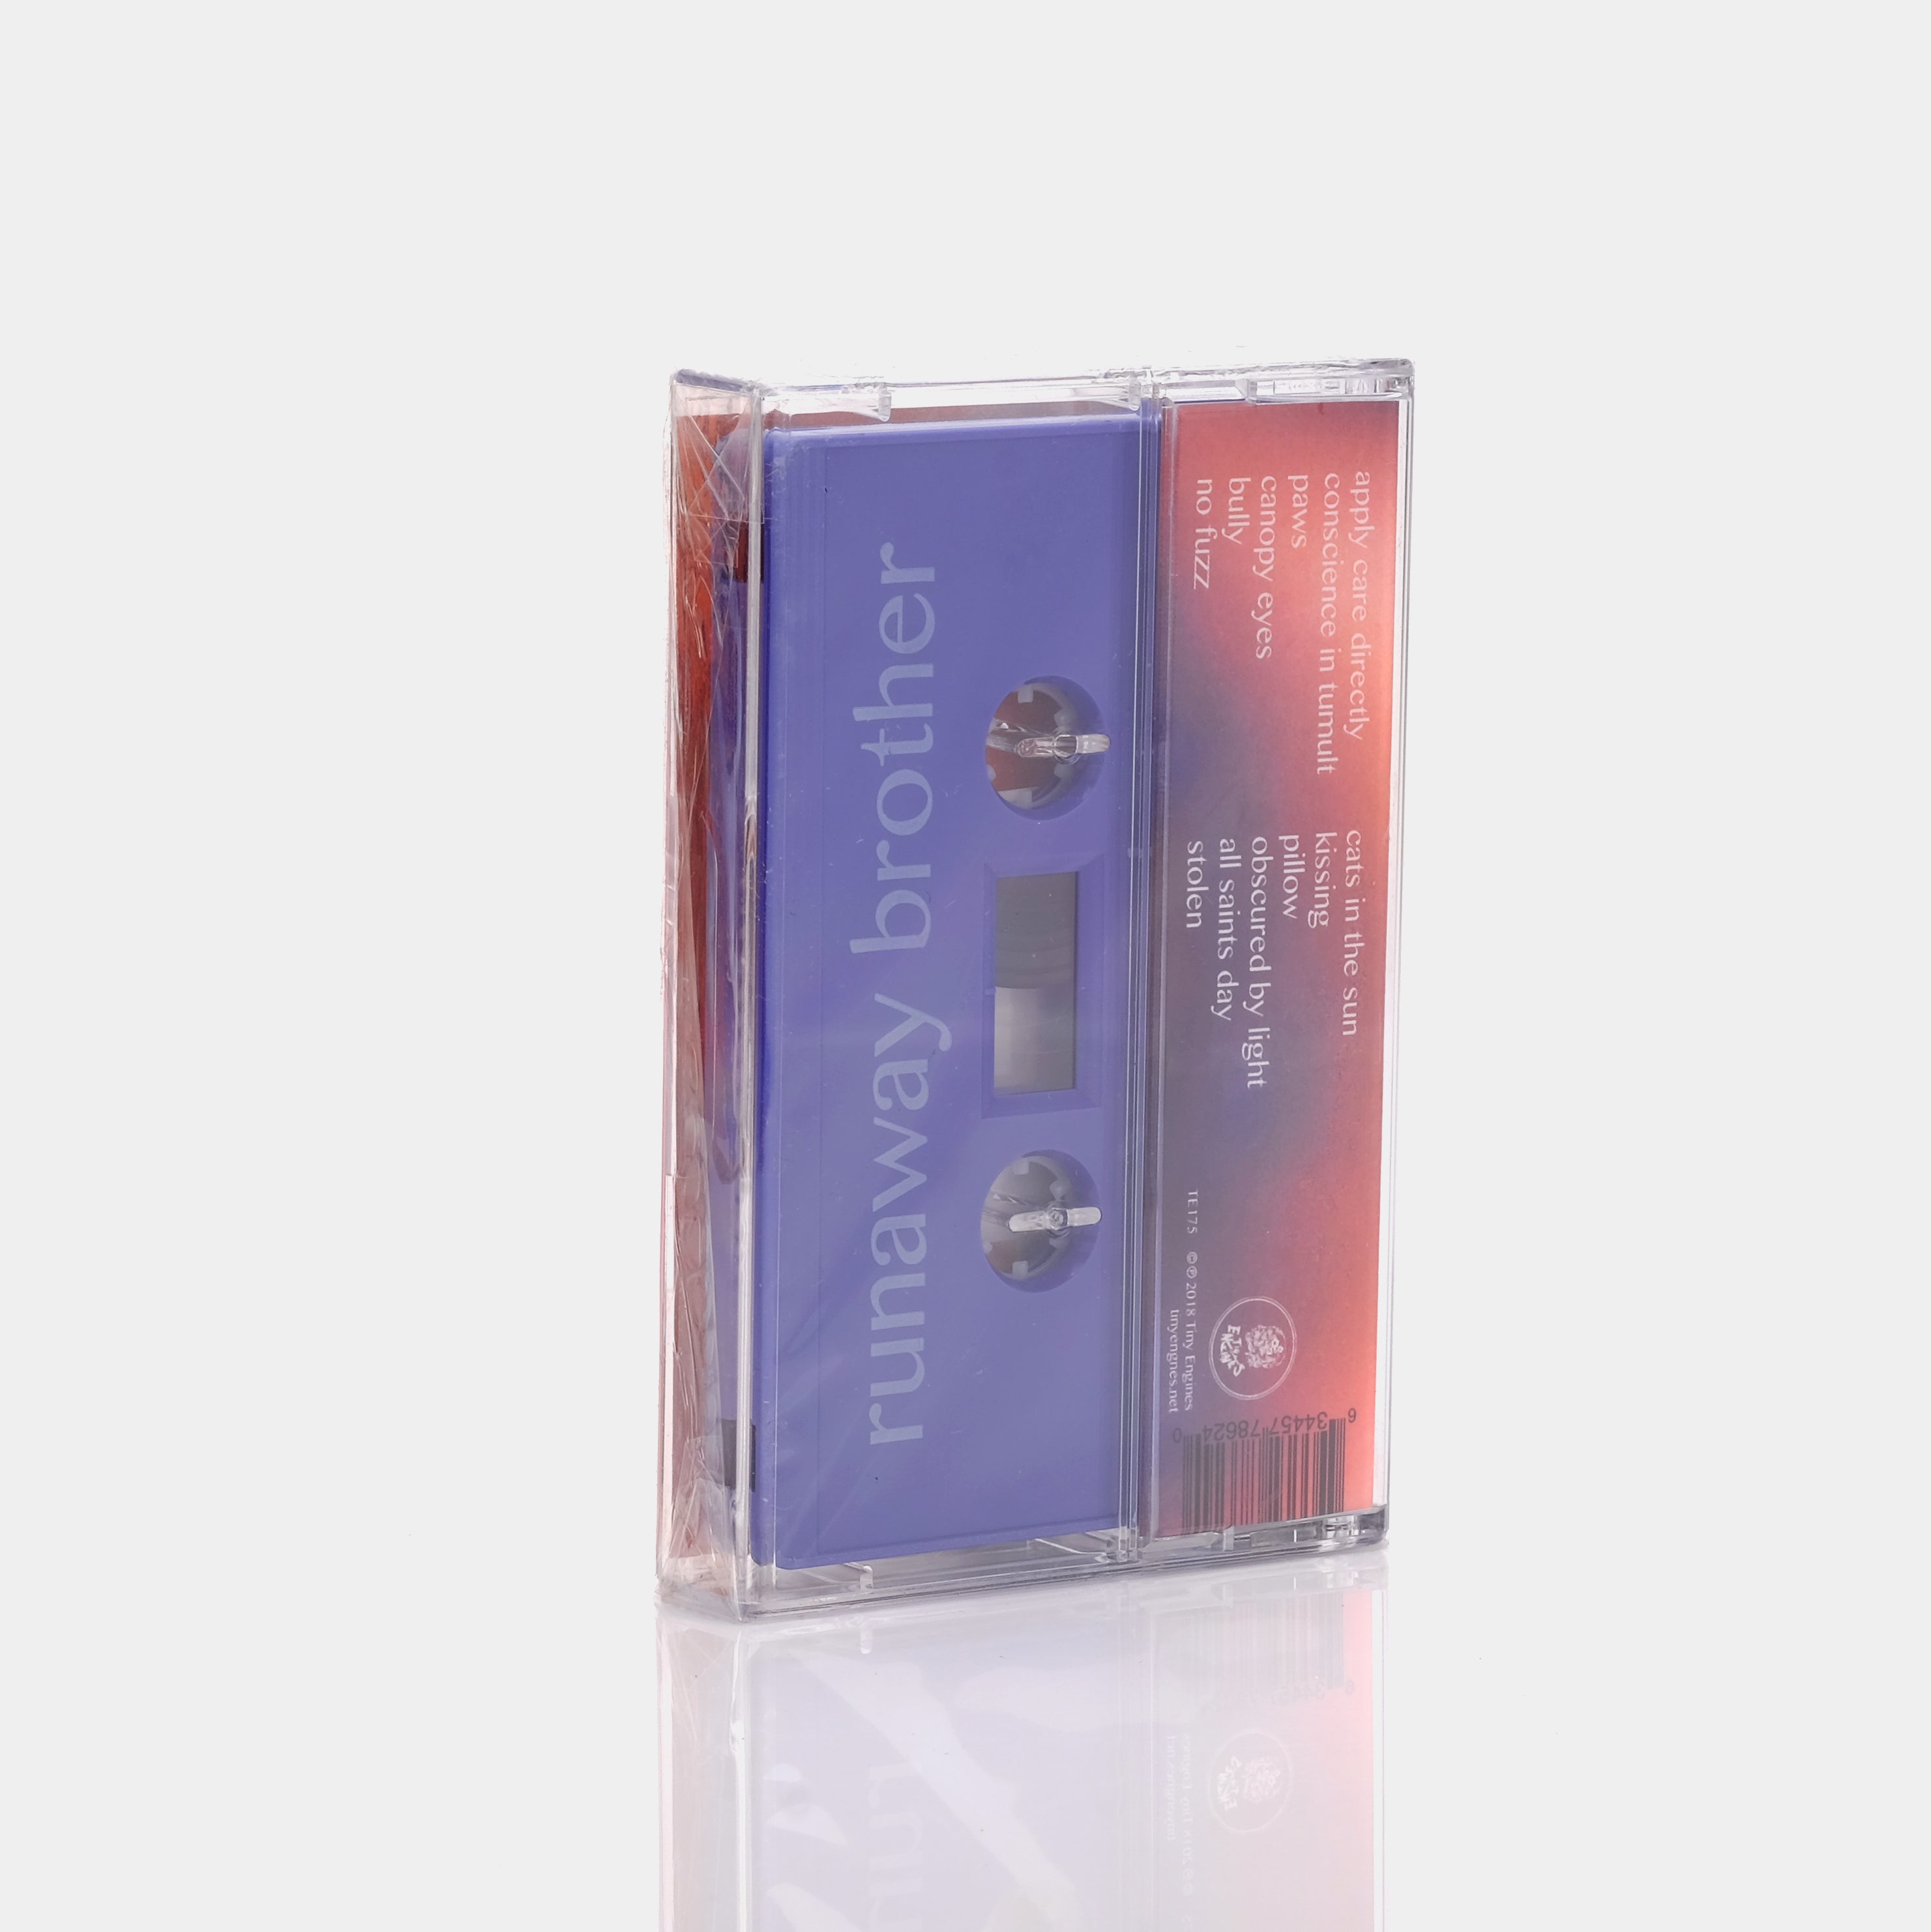 Runaway Brother - New Pocket Cassette Tape